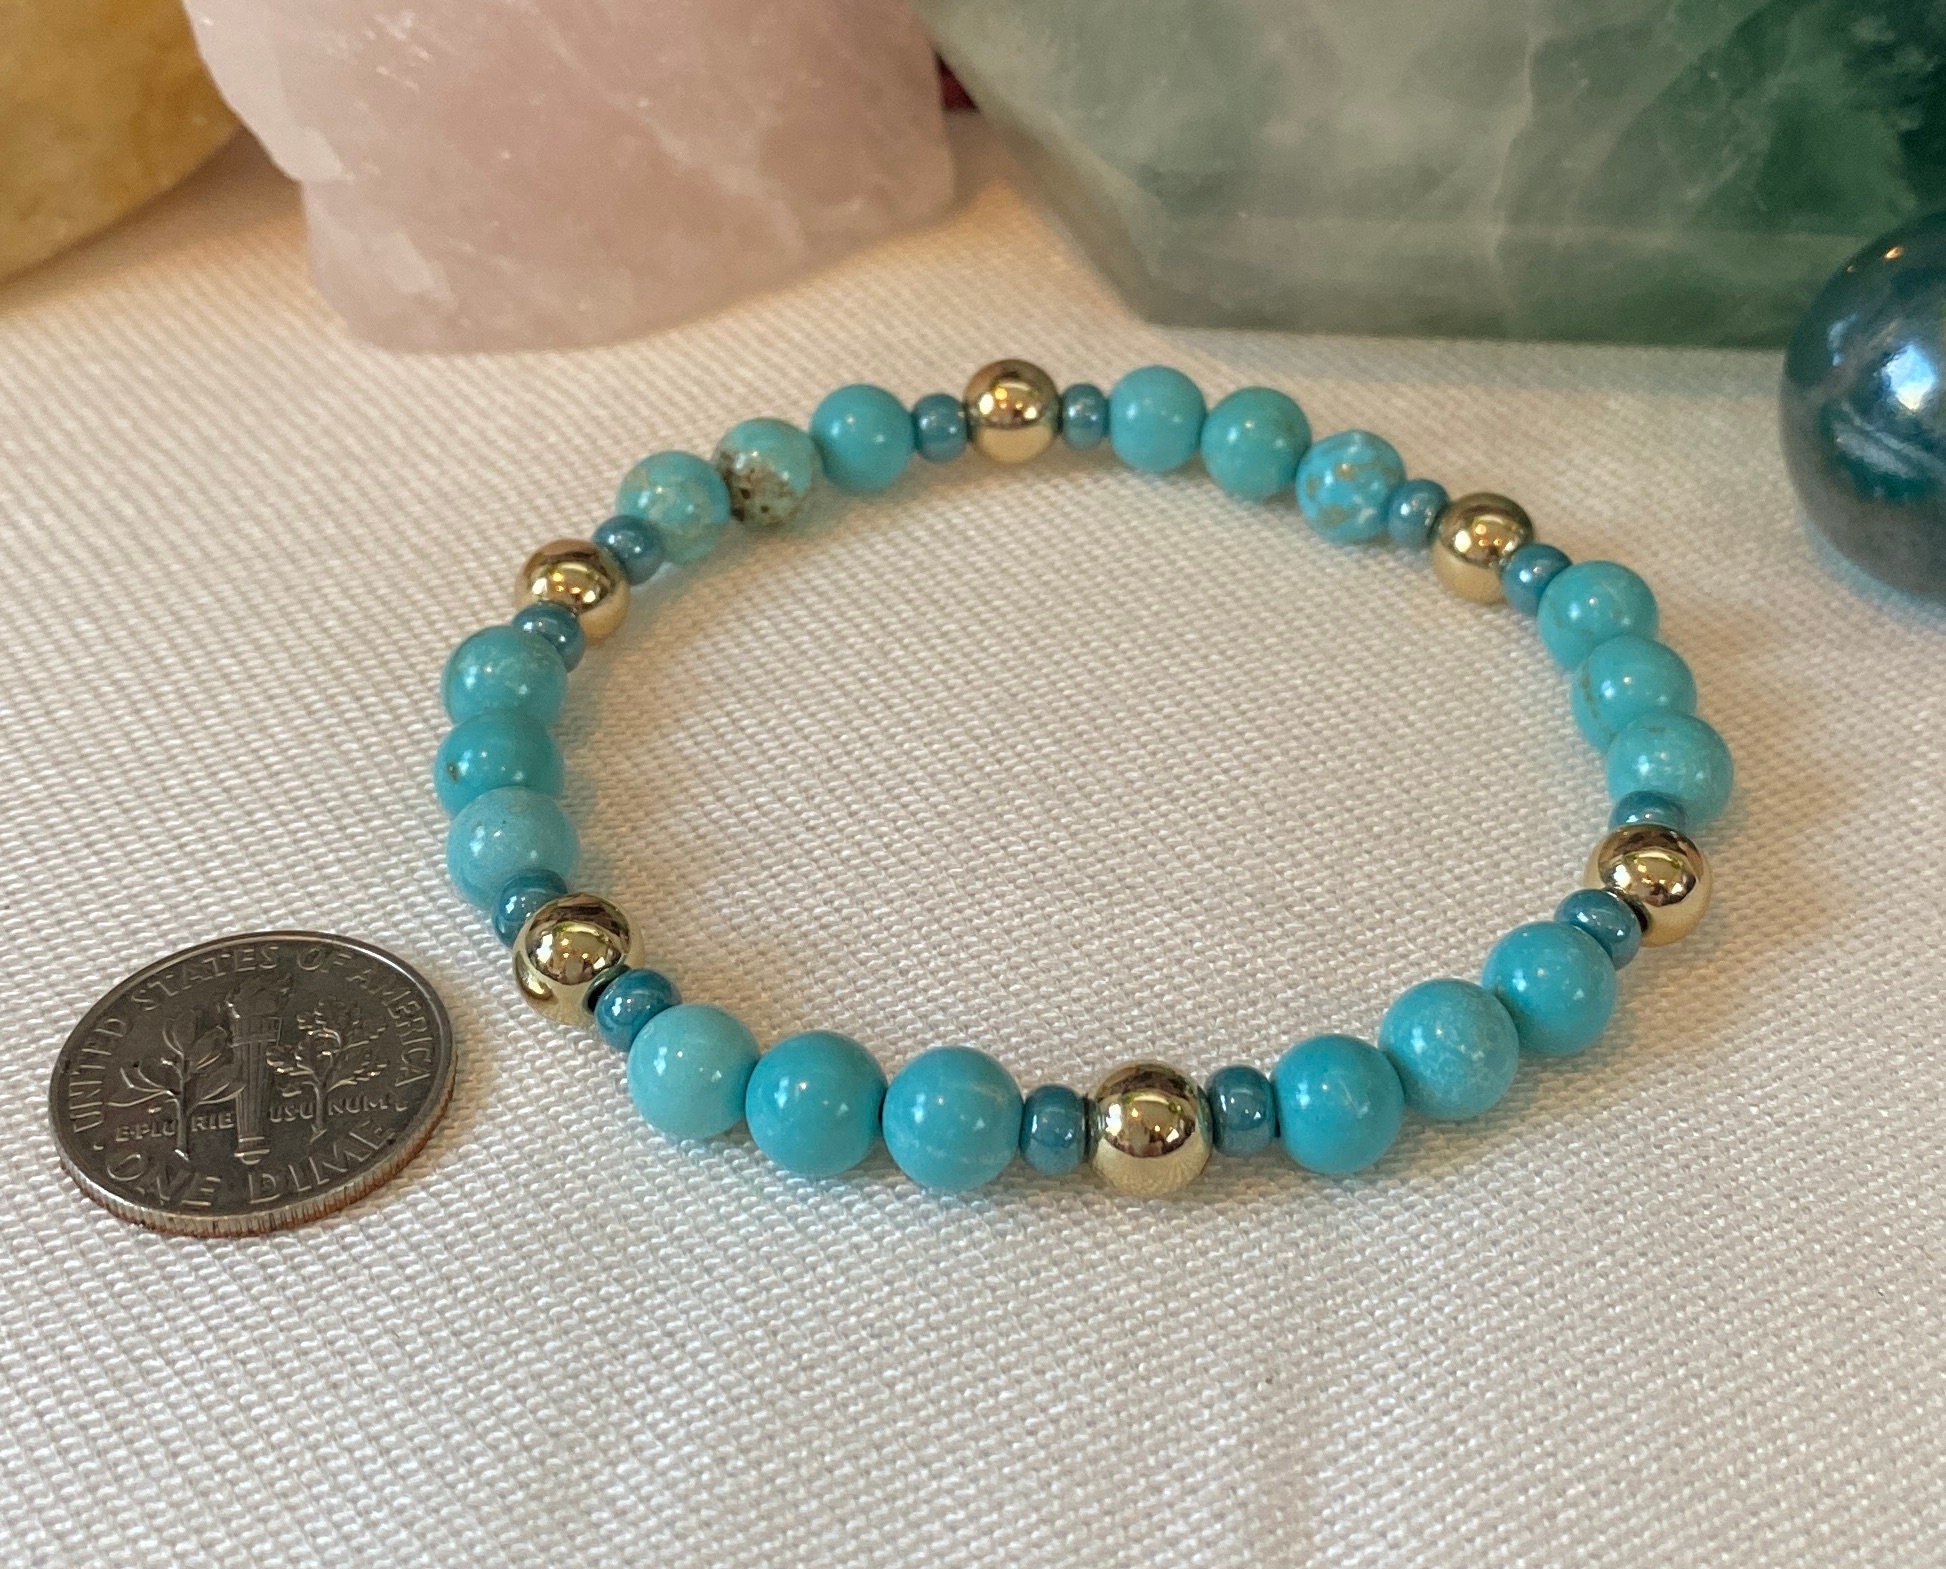 Turquoise Blue Druzy Stone Bracelet - Natural Stone Beads Bracelet for  Women - Best Birthday Gift for Her - Fiona - BR3088A - FIONA ACCESSORIES